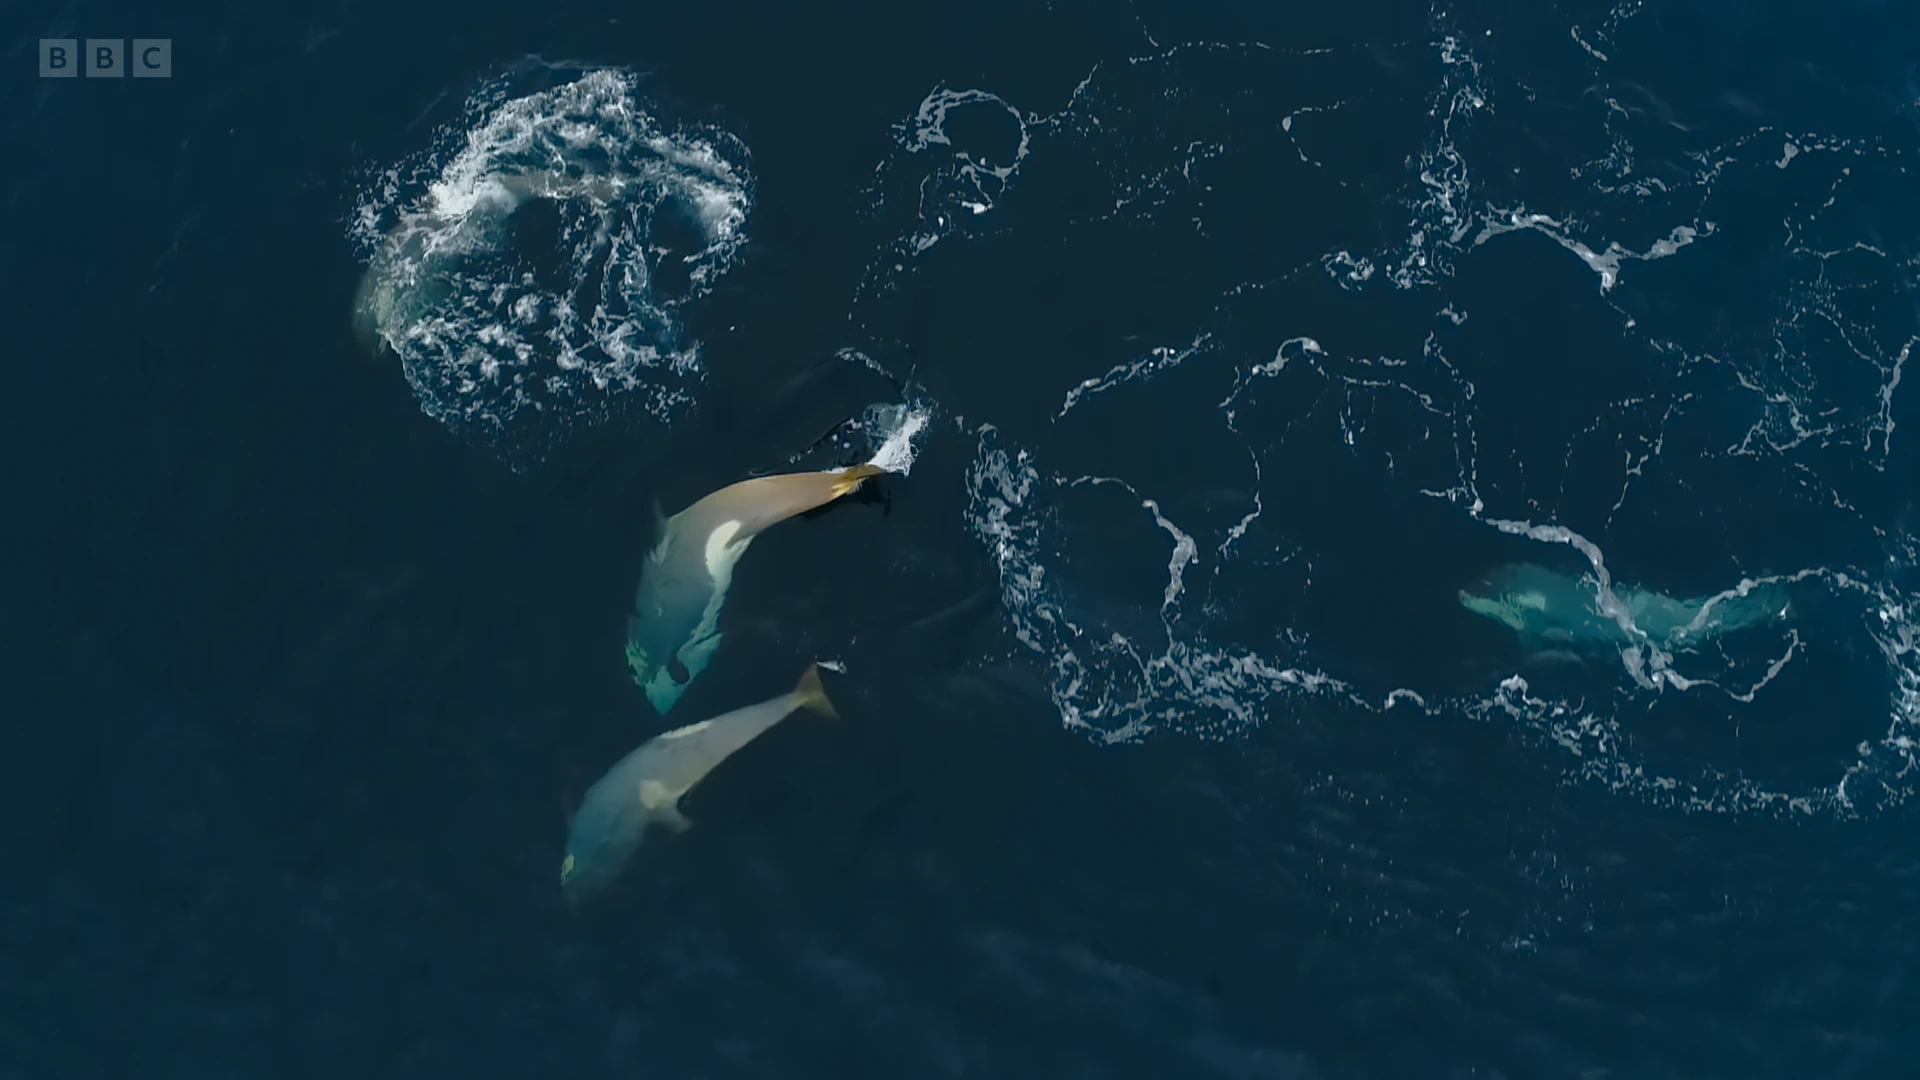 Killer whale (Orcinus orca) as shown in Seven Worlds, One Planet - Antarctica